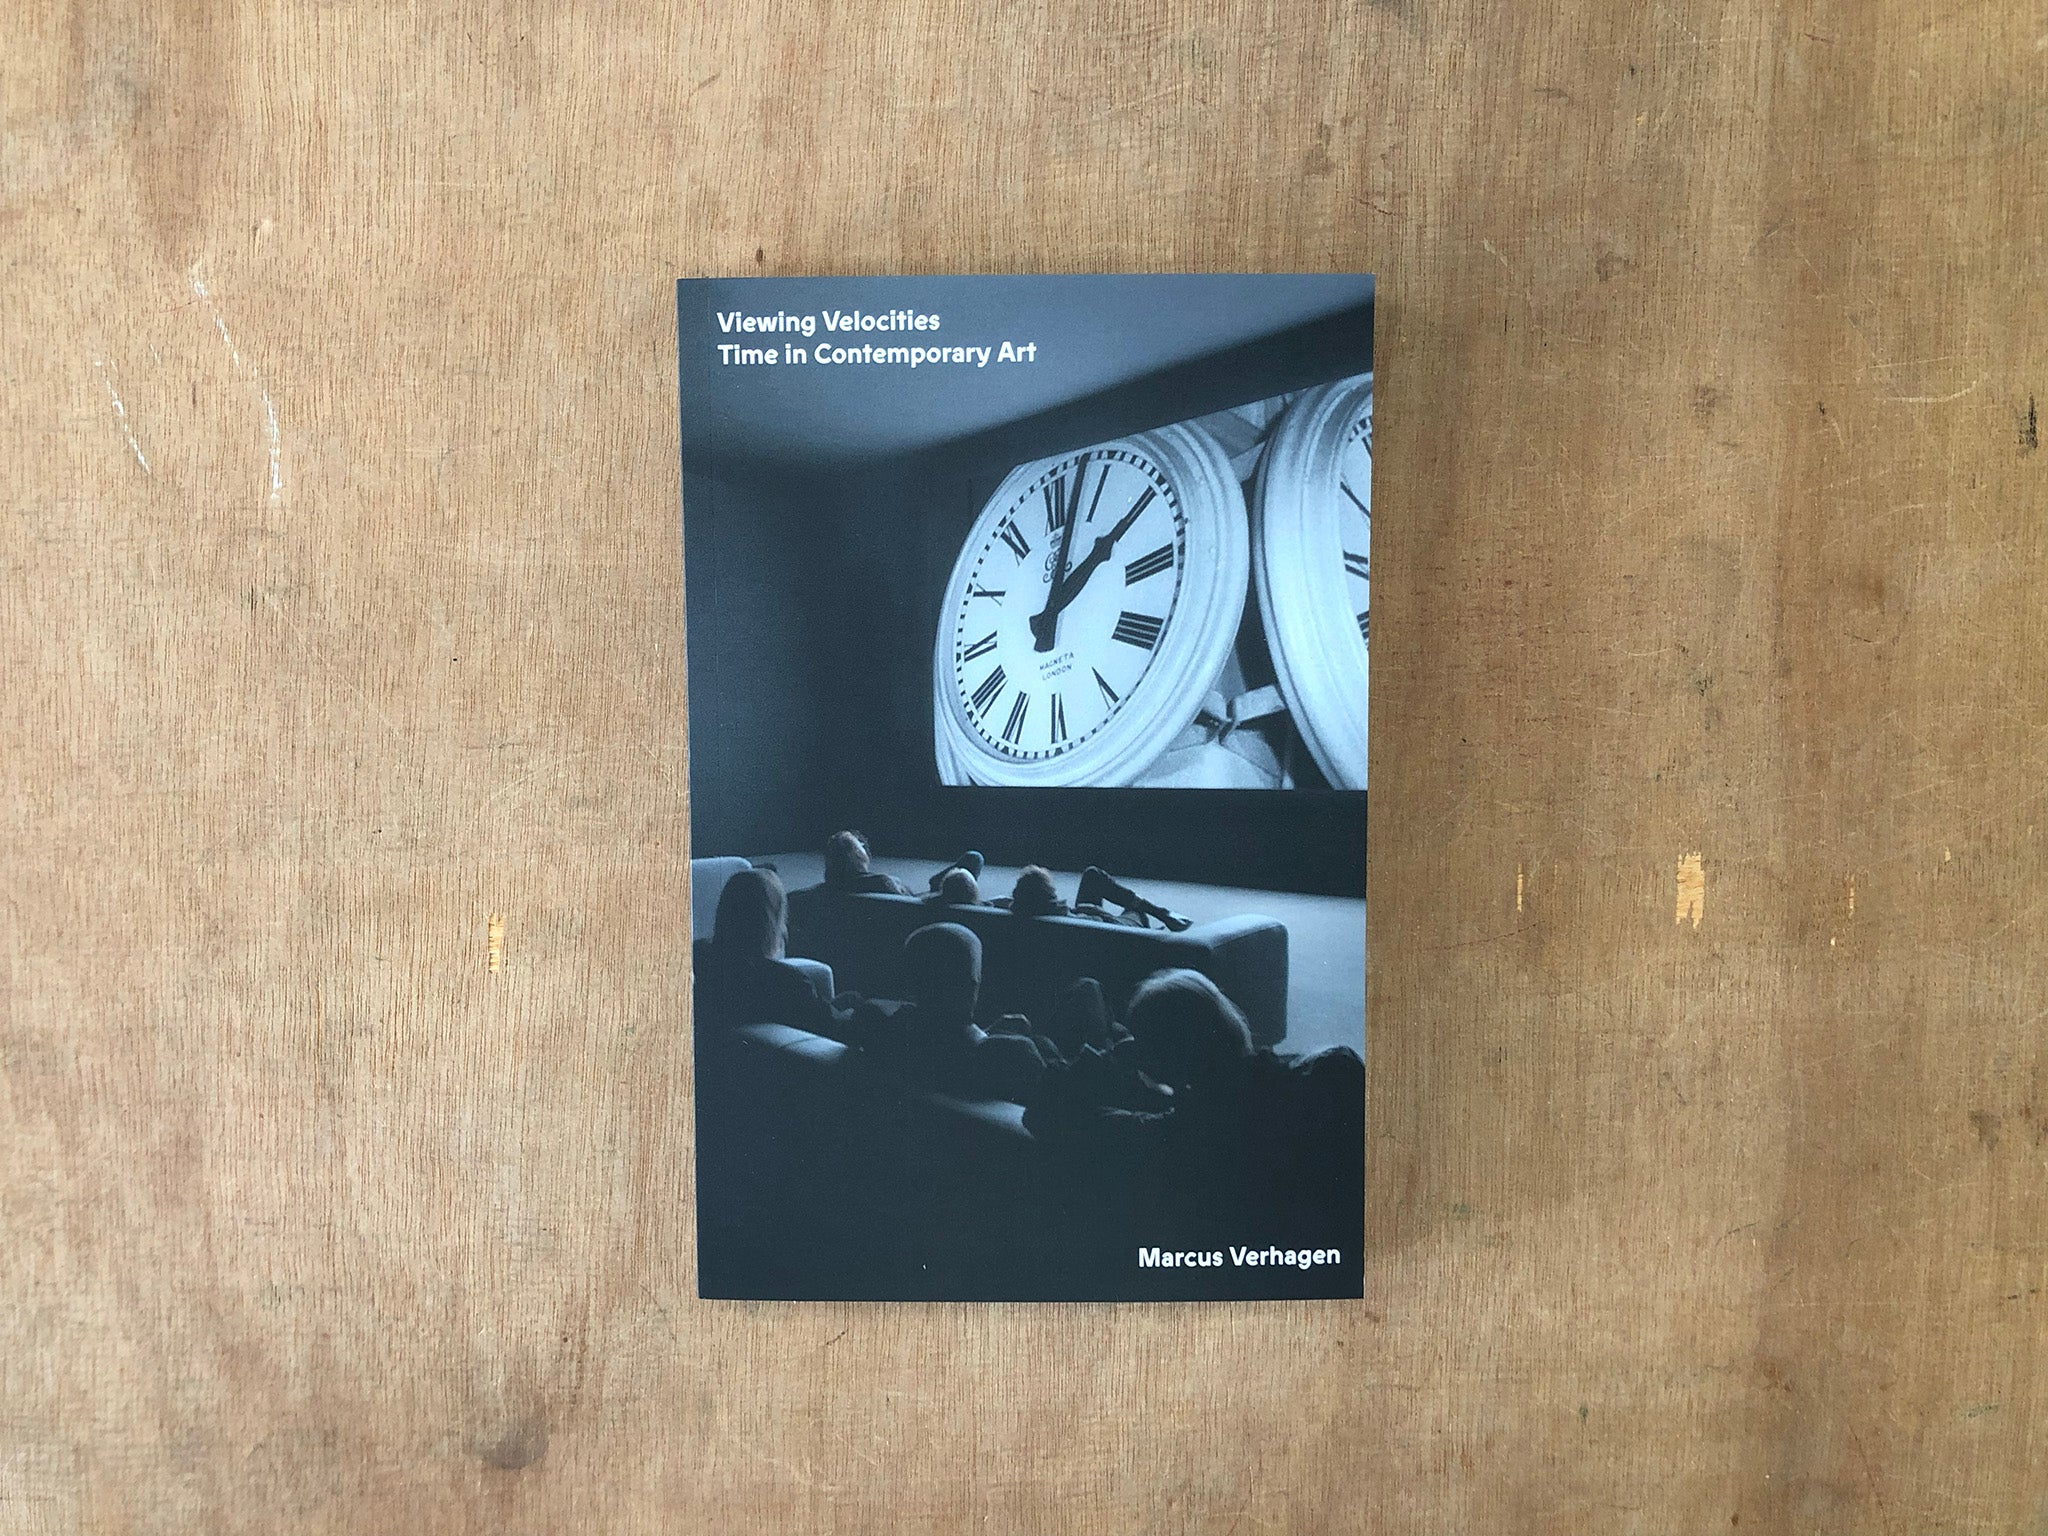 VIEWING VELOCITIES: TIME IN CONTEMPORARY ART by Marcus Verhagen